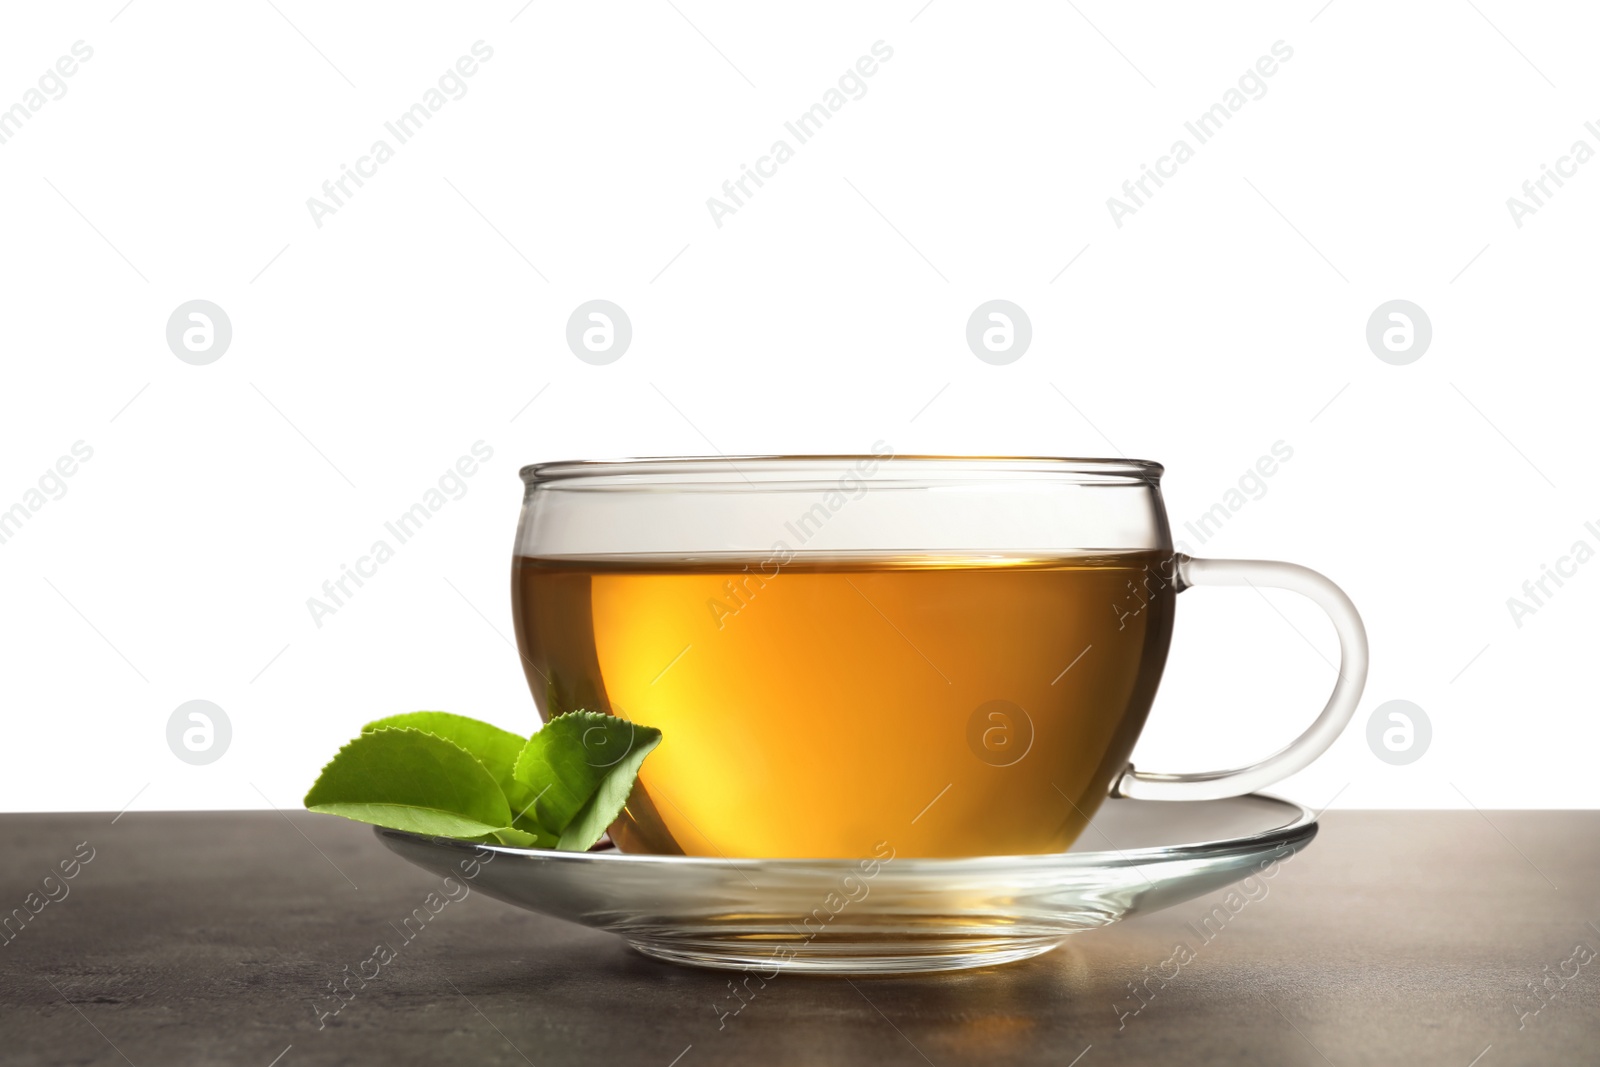 Photo of Cup of green tea and leaves on grey table